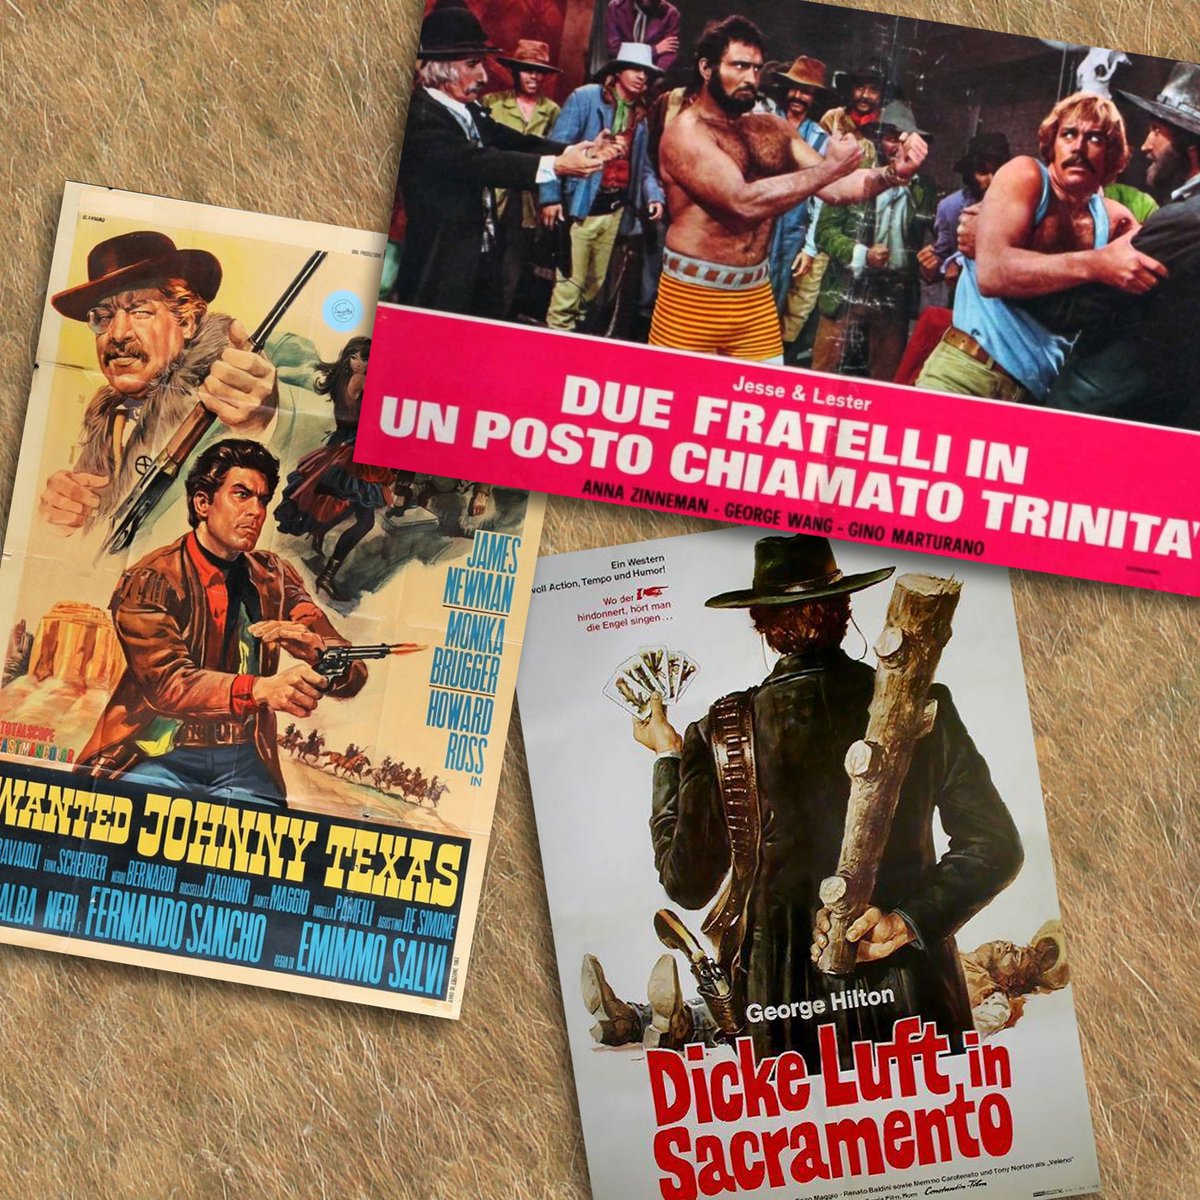 Released on this day: 1967 'Wanted Johnny Texas' starring Willi Colombini & Howard Ross. 1972 'Jesse & Lester, Two Brothers in a place called Trinity' starring Richard Harrison & Anna Zinneman. 1974 'The Crazy Bunch' starring George Hilton. #spaghettiwestern